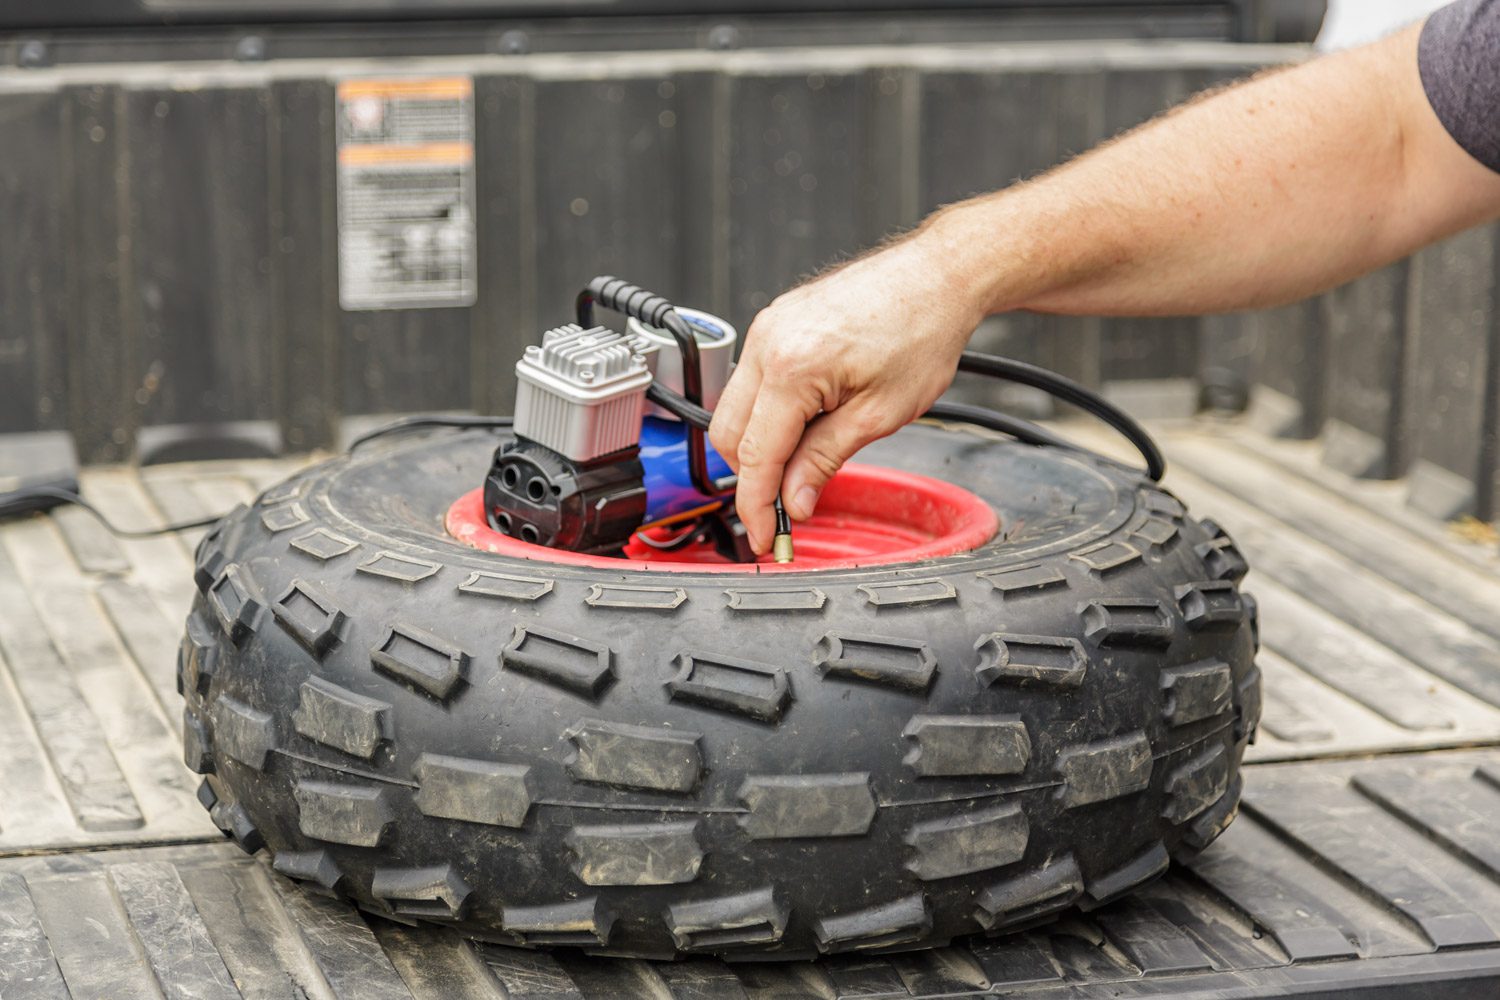 The ATV Trail Rider Team shows you how to Repair a flat tire while on the trail.